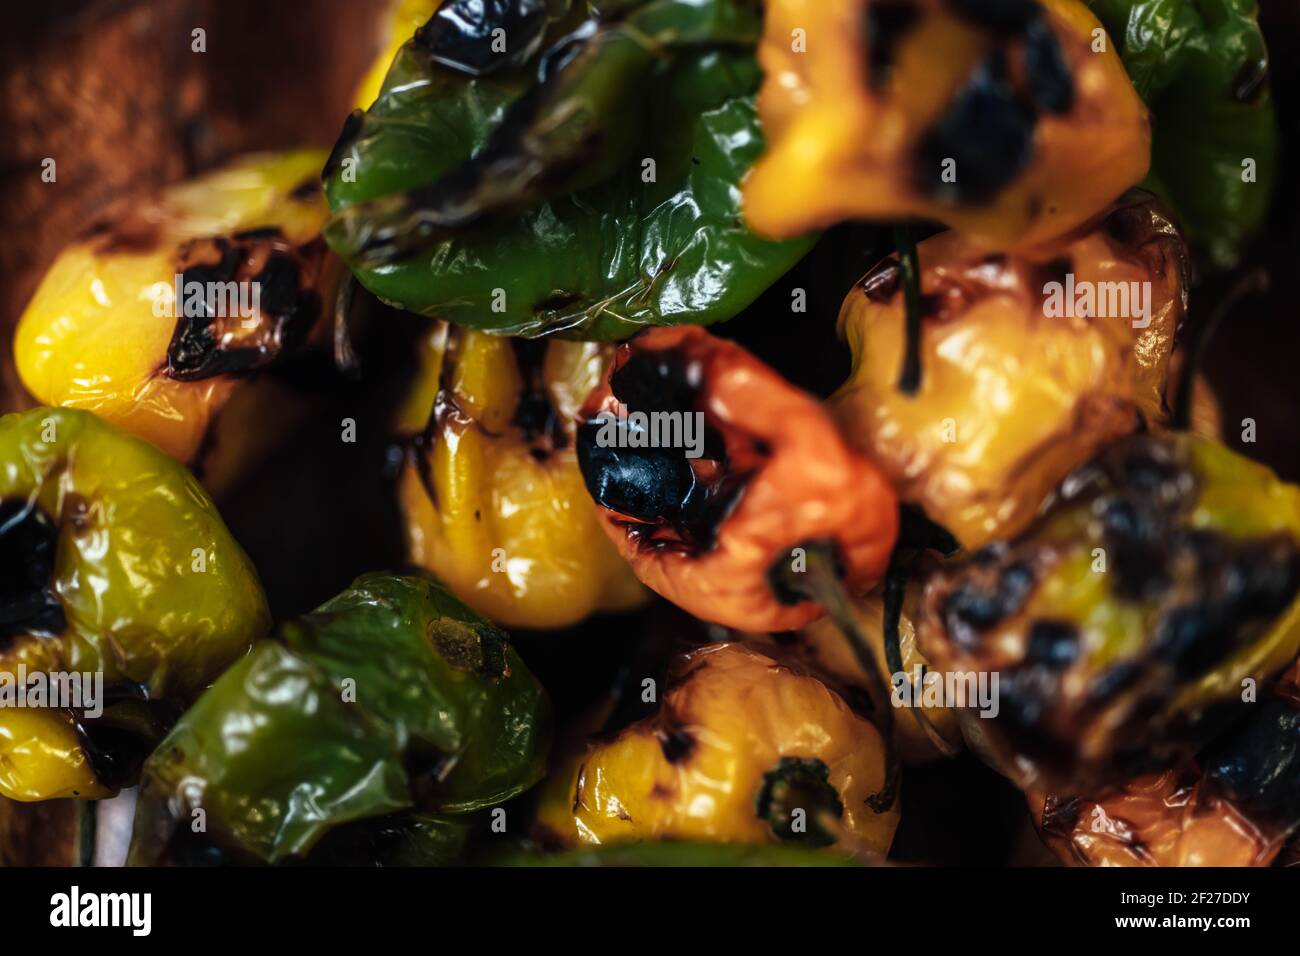 Closeup shot of grilled tasty bell peppers on a green surface, lightly burned habanero peppers for spicy Mexican sauce Stock Photo